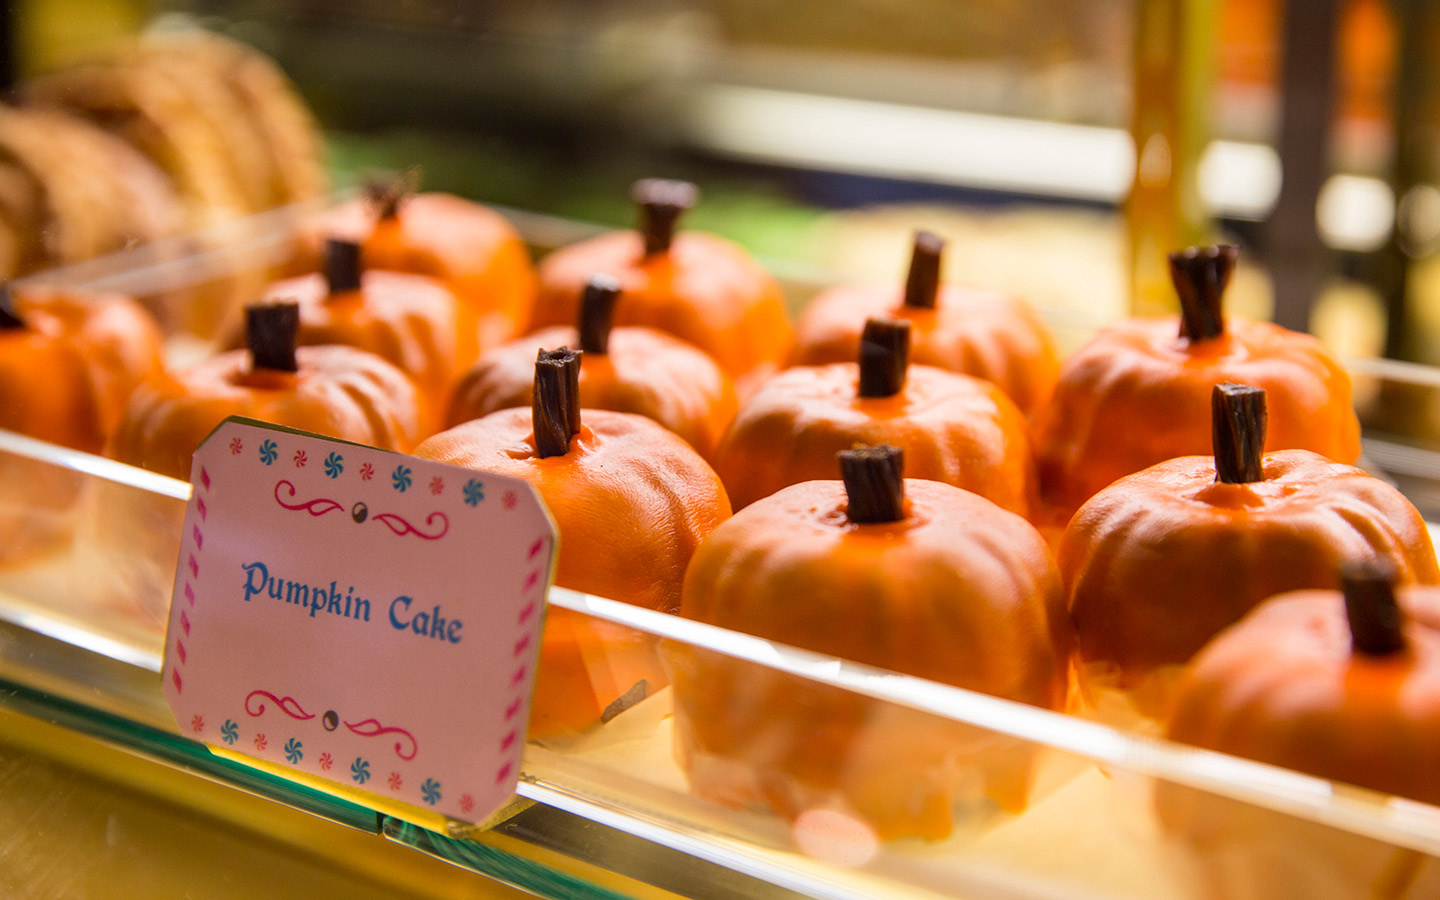 Indugle in new Pumpkin Cakes at Sugarplum's sweet shop in The Wizarding World of Harry Potter - Diagon Alley